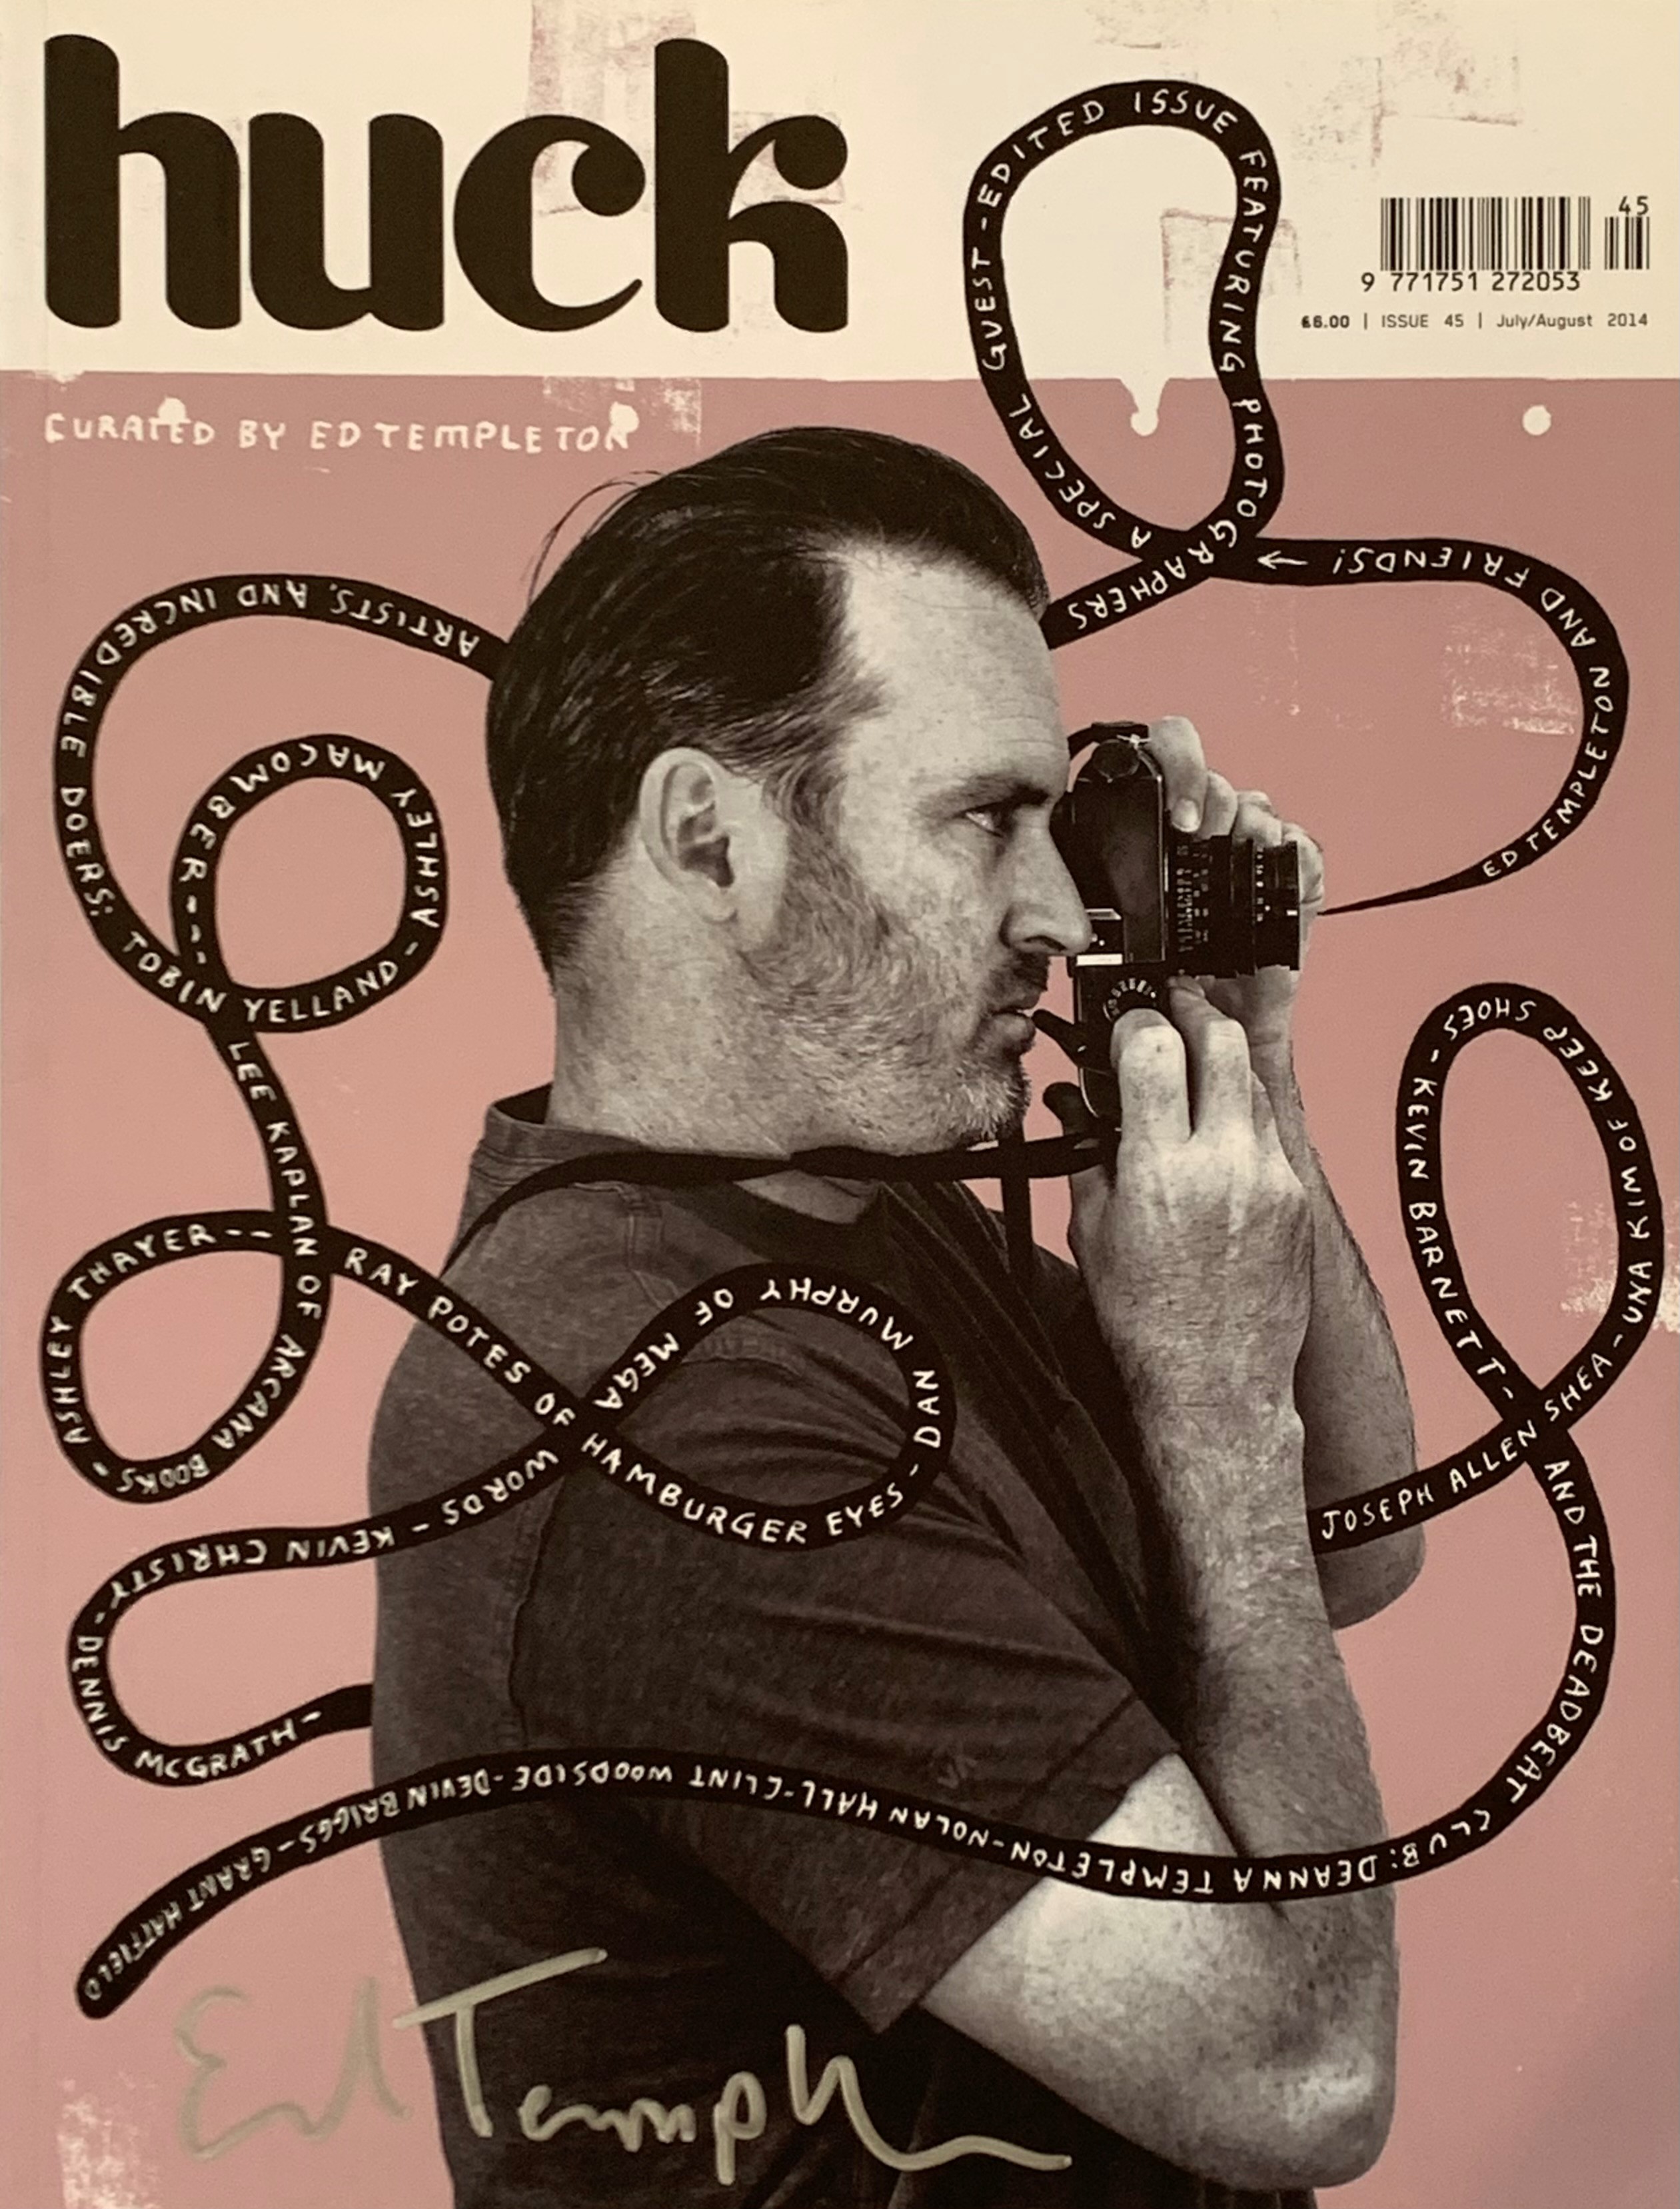 (TEMPLETON, ED) (HUCK MAGAZINE). Templeton, Ed & Andrea Kurland, Editors - HUCK MAGAZINE ISSUE 45: JULY / AUGUST 2014: CURATED BY ED TEMPLETON - SIGNED BY THE PHOTOGRAPHER